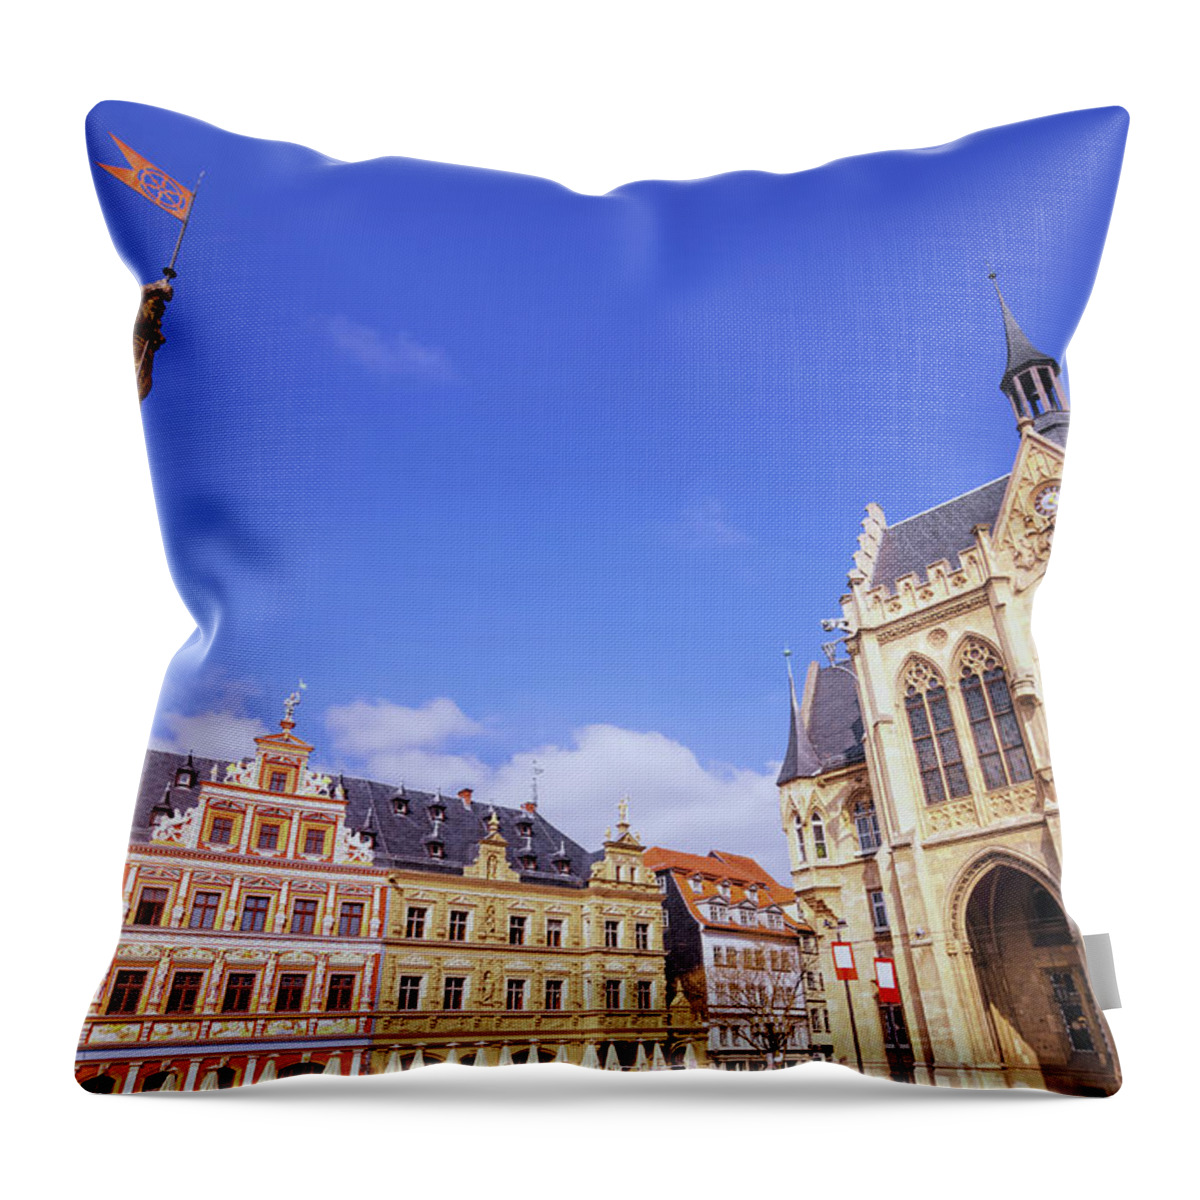 Gothic Style Throw Pillow featuring the photograph Erfurt Fischmarkt Fish Market And by Juergen Sack